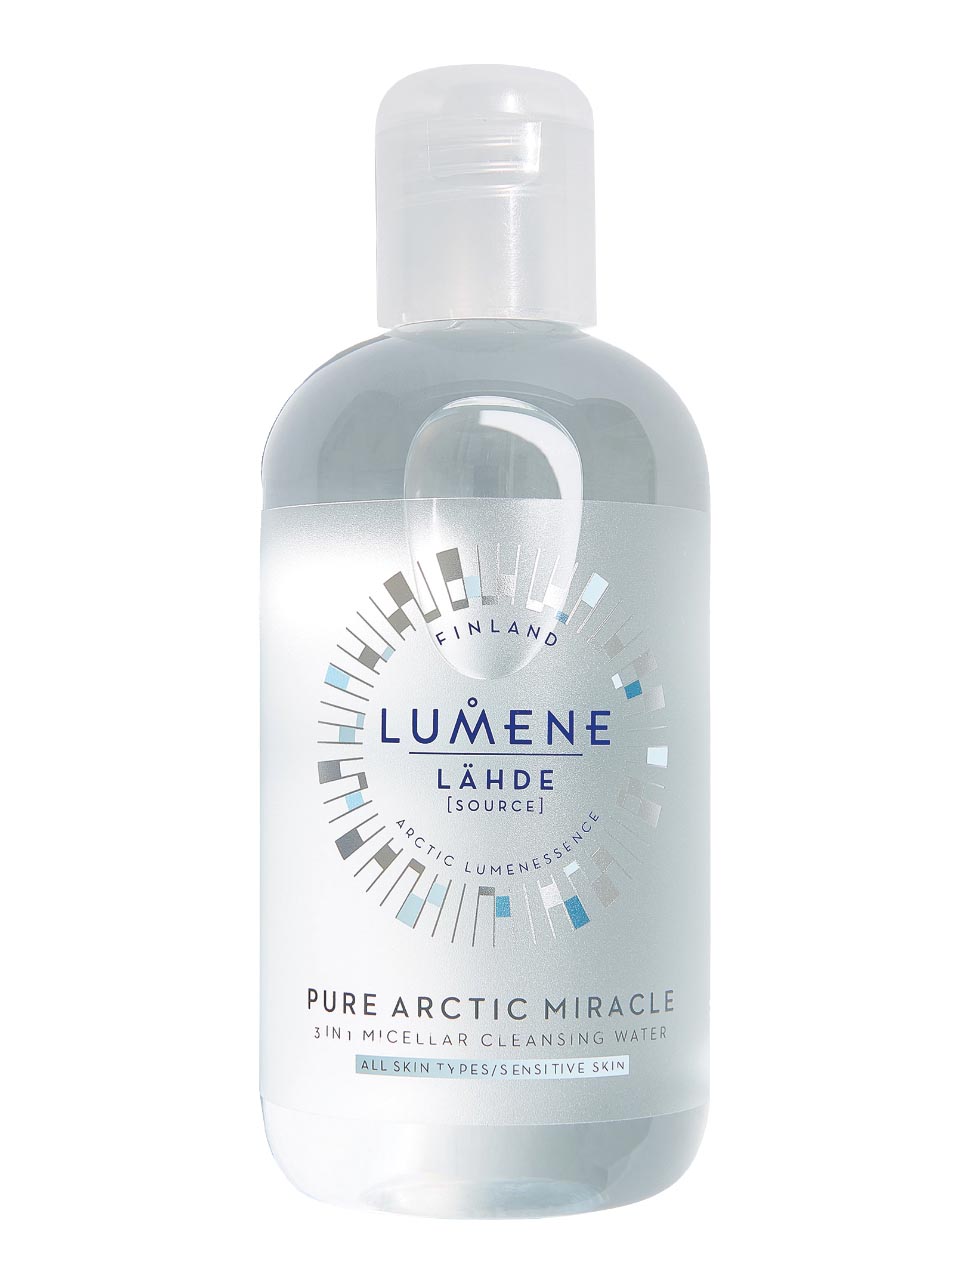 Lumene Nordic Hydra (Lähde) Pure Arctic Miracle 3-in-1 Micellar Cleansing Water 250 ml. null - onesize - 1